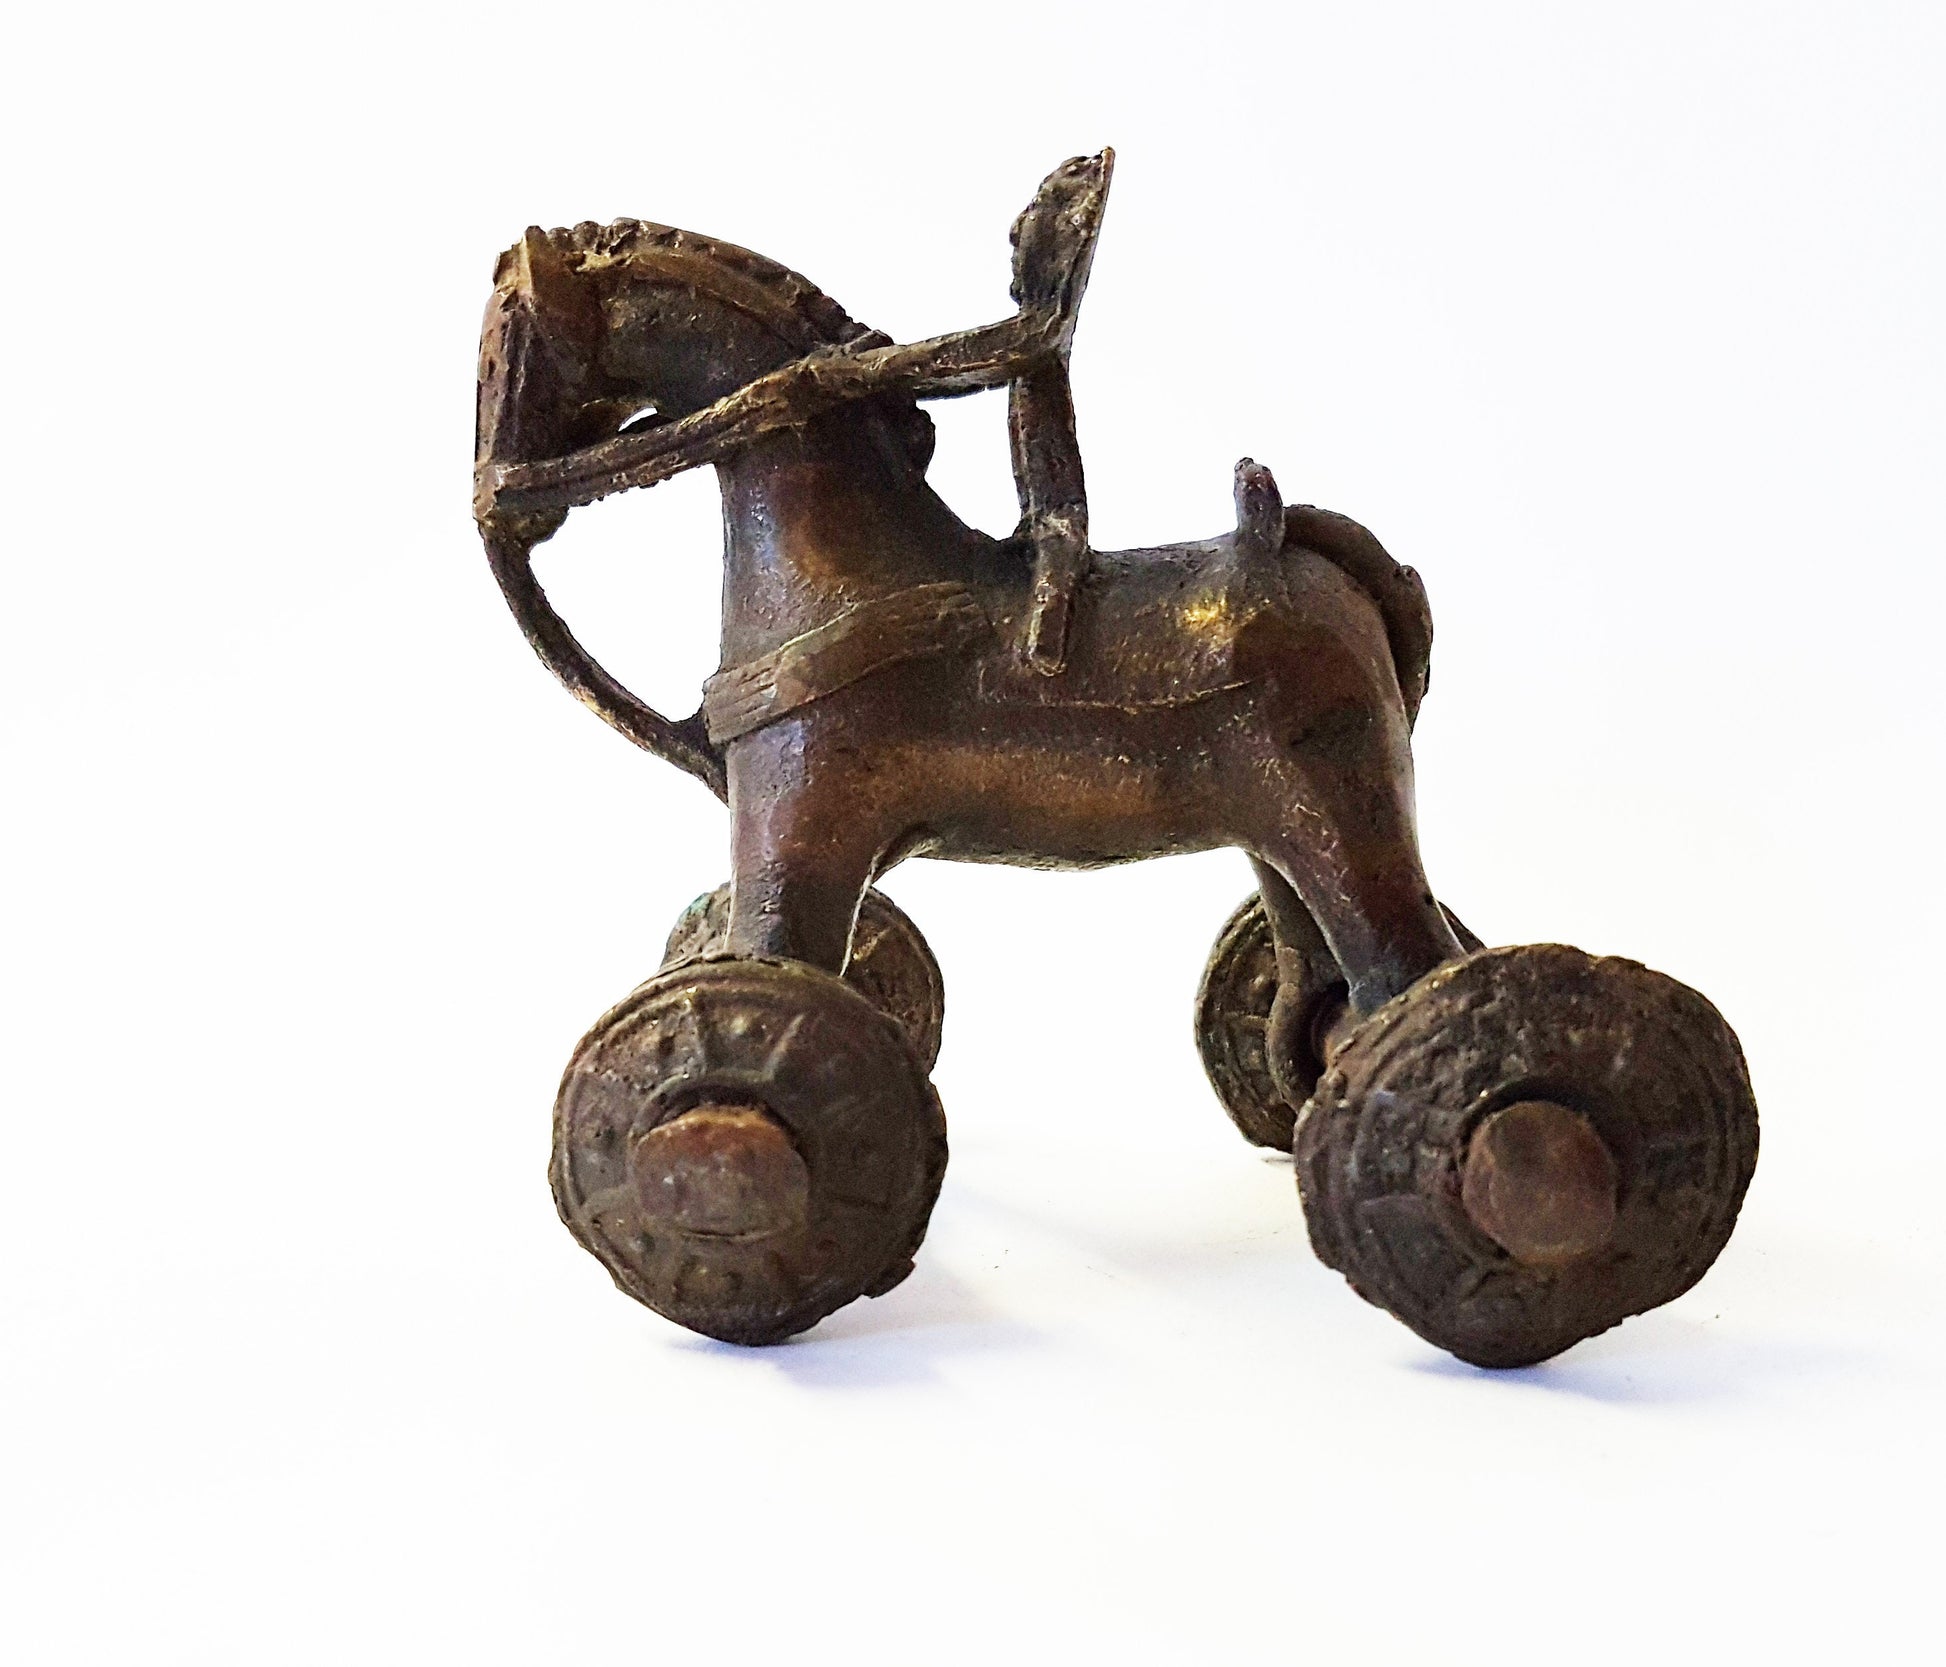 Equestrian and equine gifts: Horse gift collectible for horse lovers, riders & equestrians. Vintage horse art and decor. 4 inches long. - Vintage India Ca